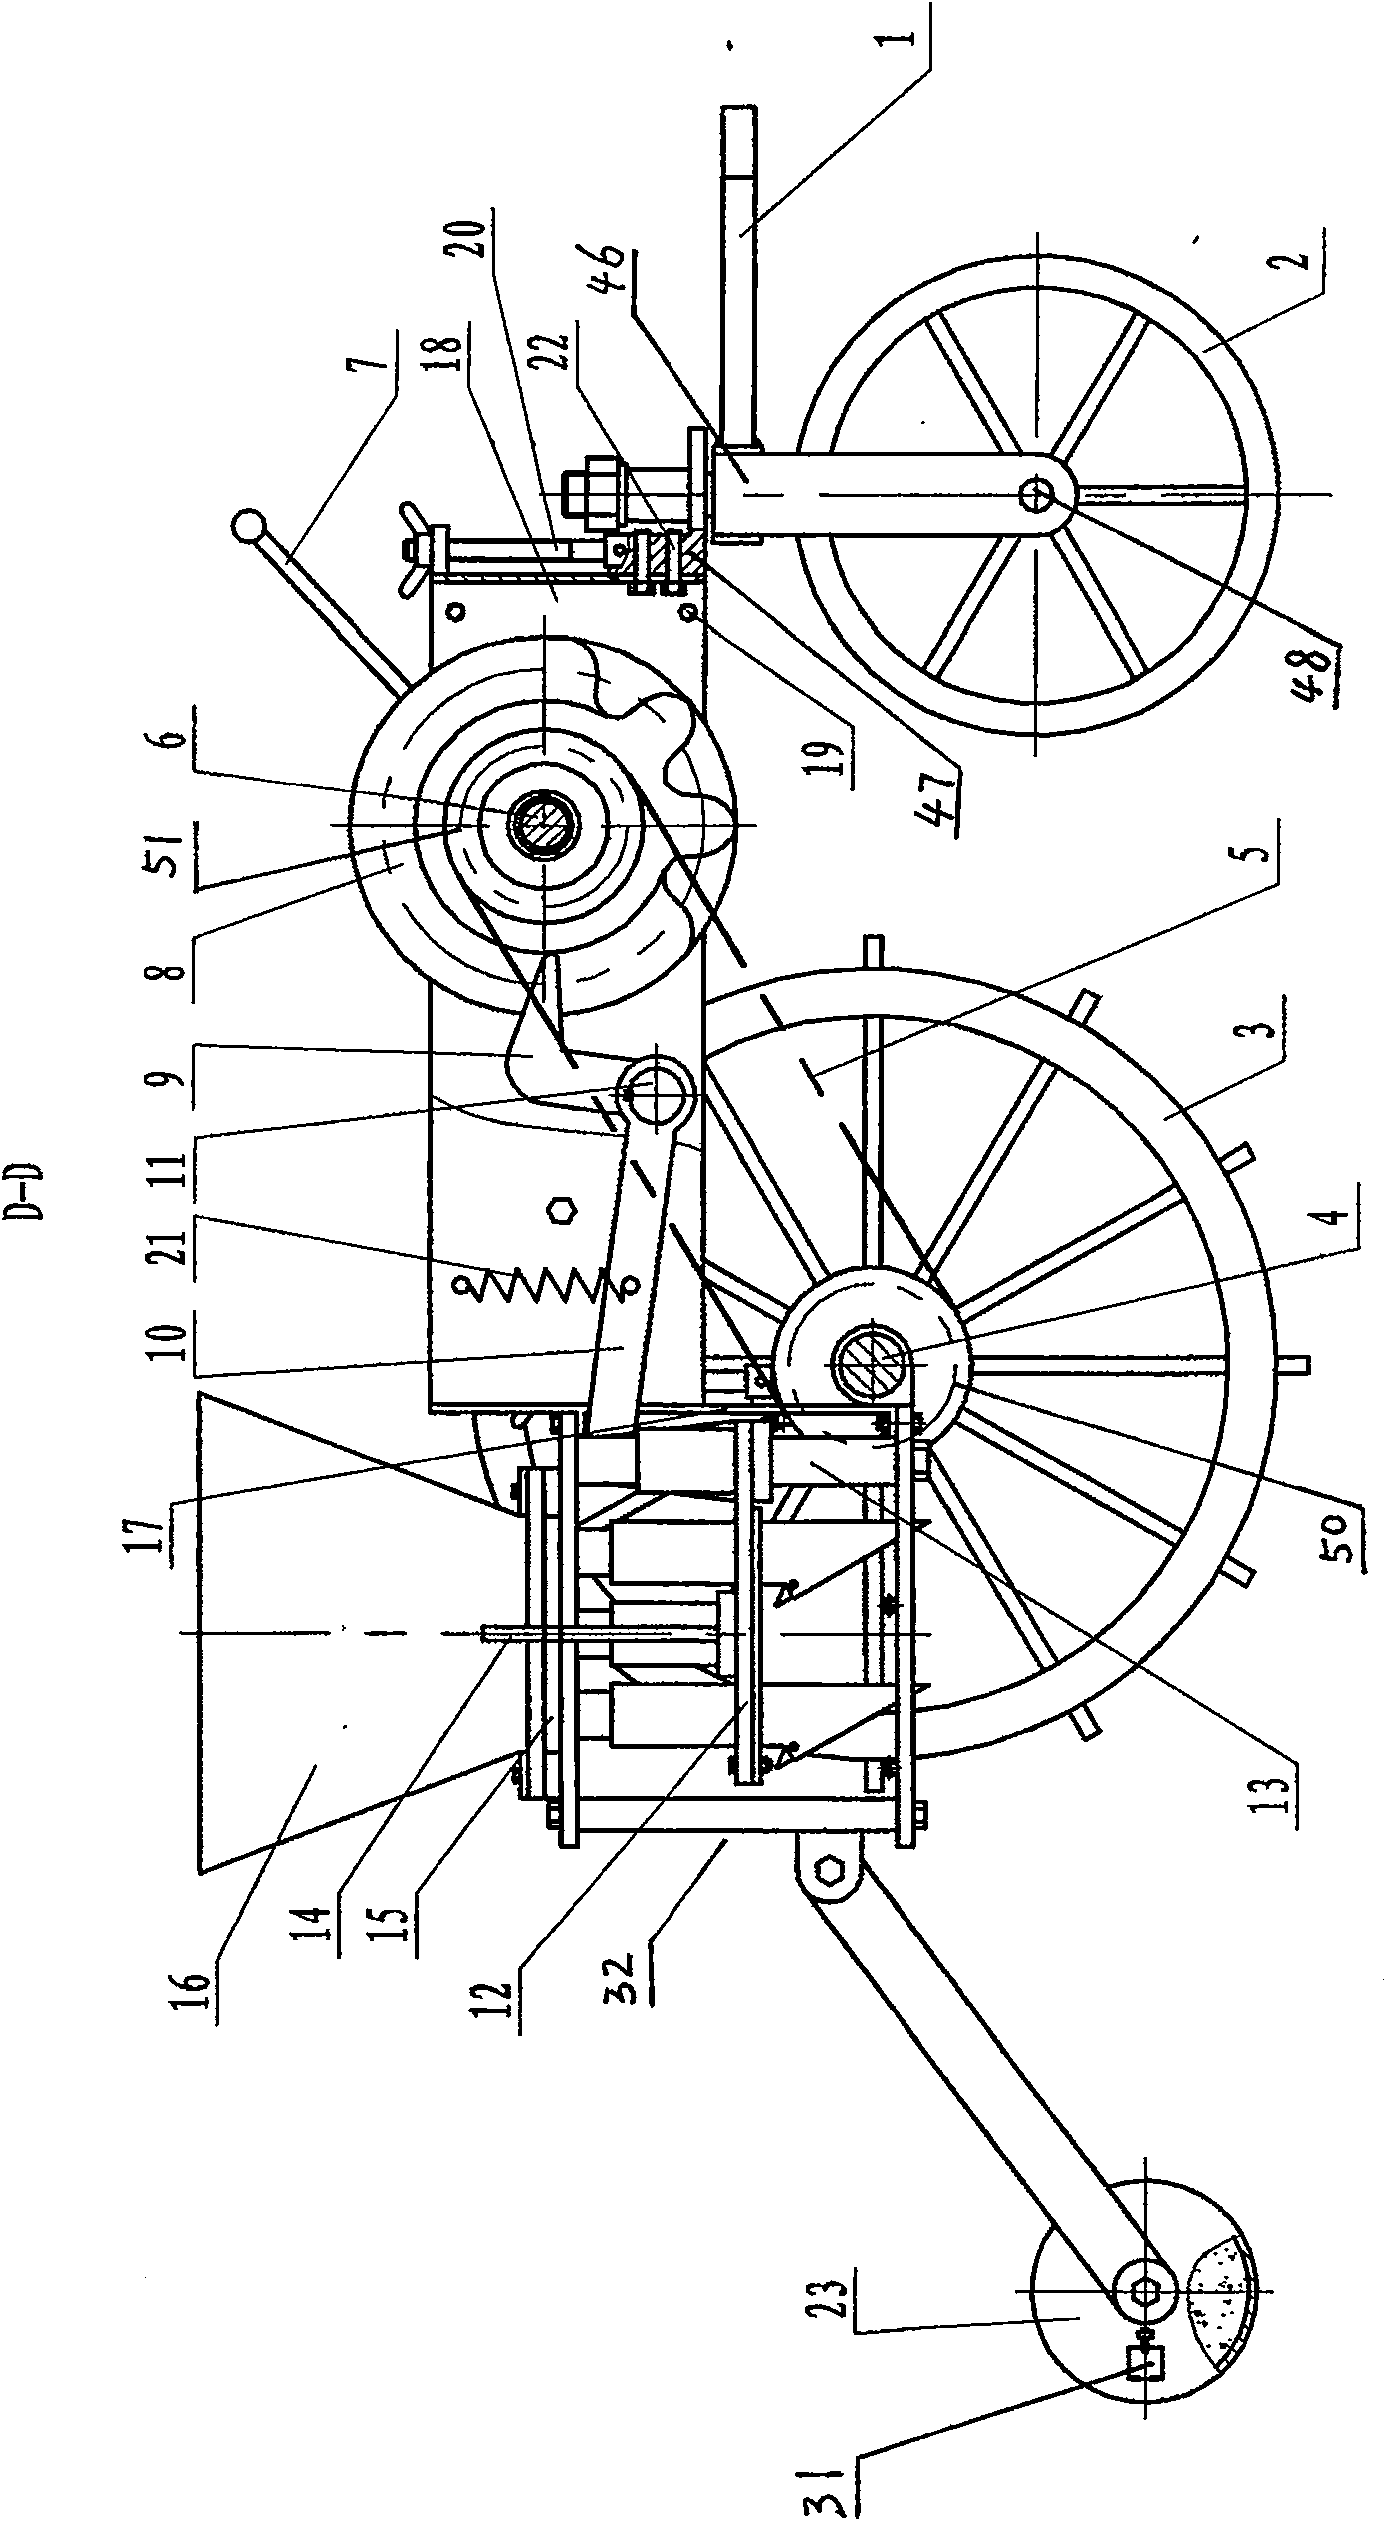 Seed sowing machine